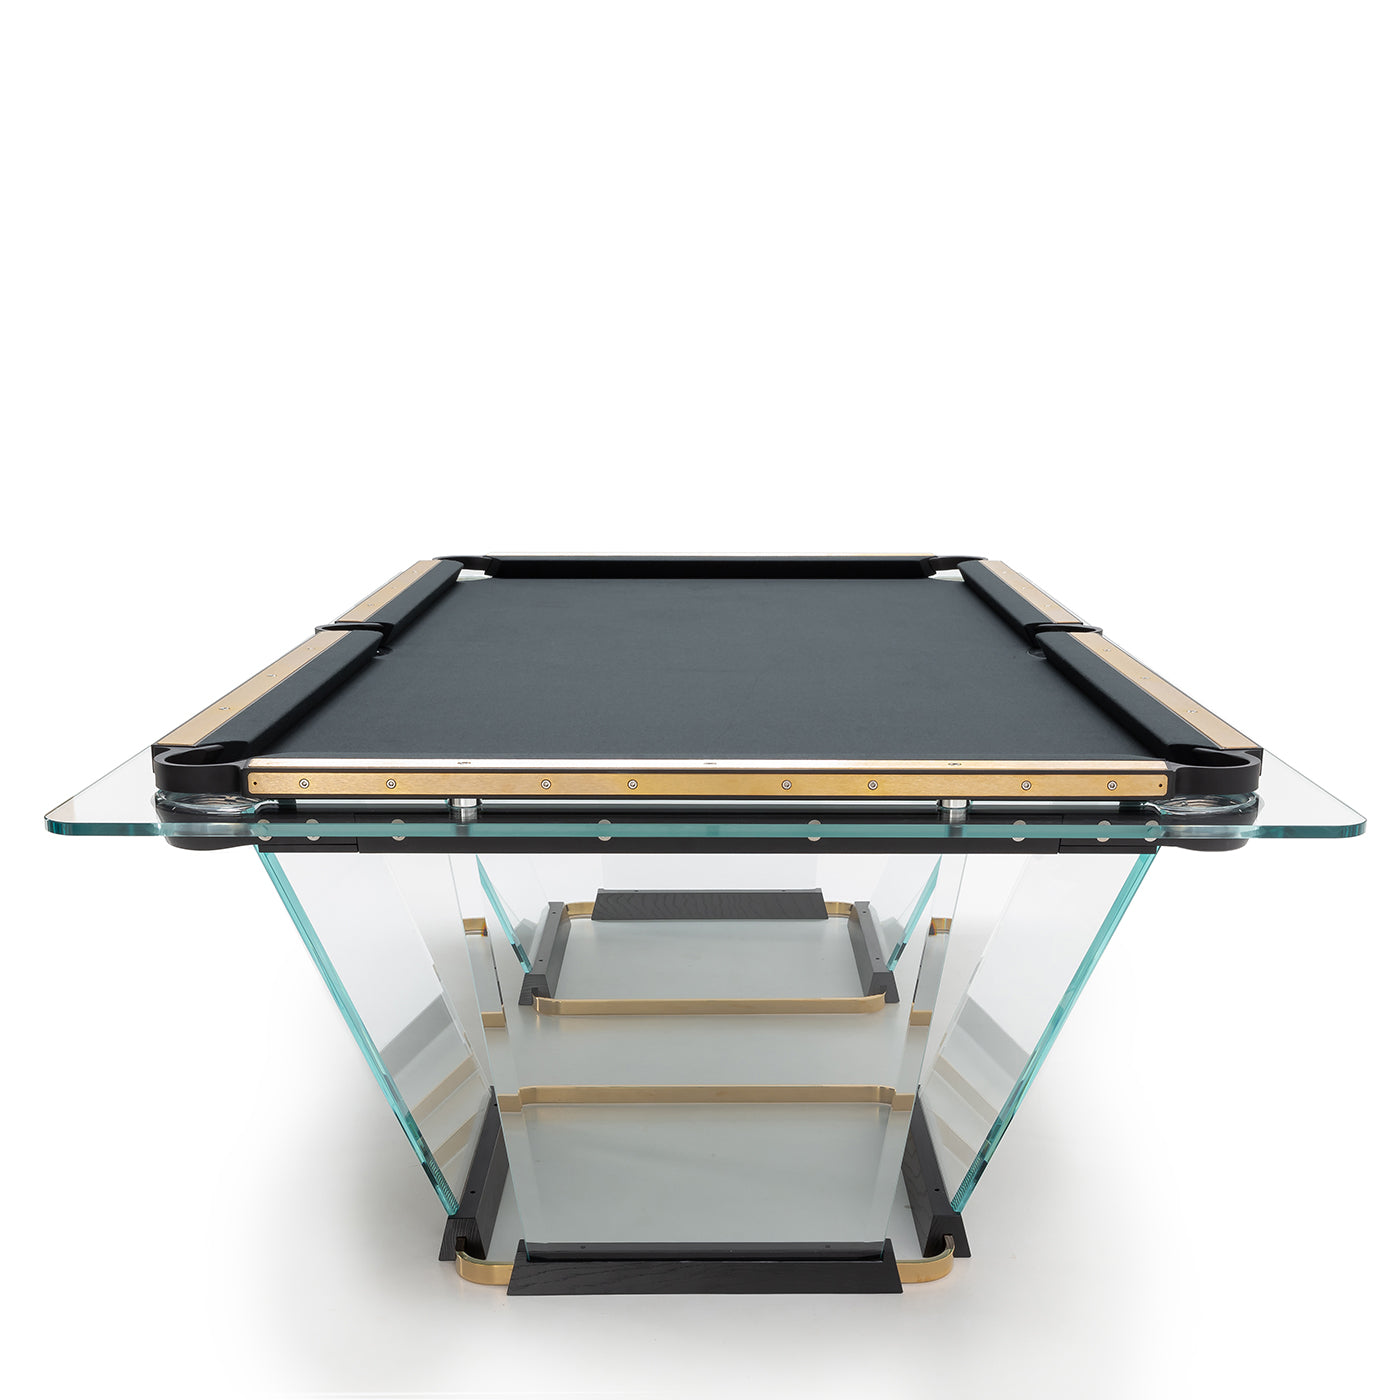 T1.3 Gold 24K Limited edition Pool Table - 8ft - Alternative view 2